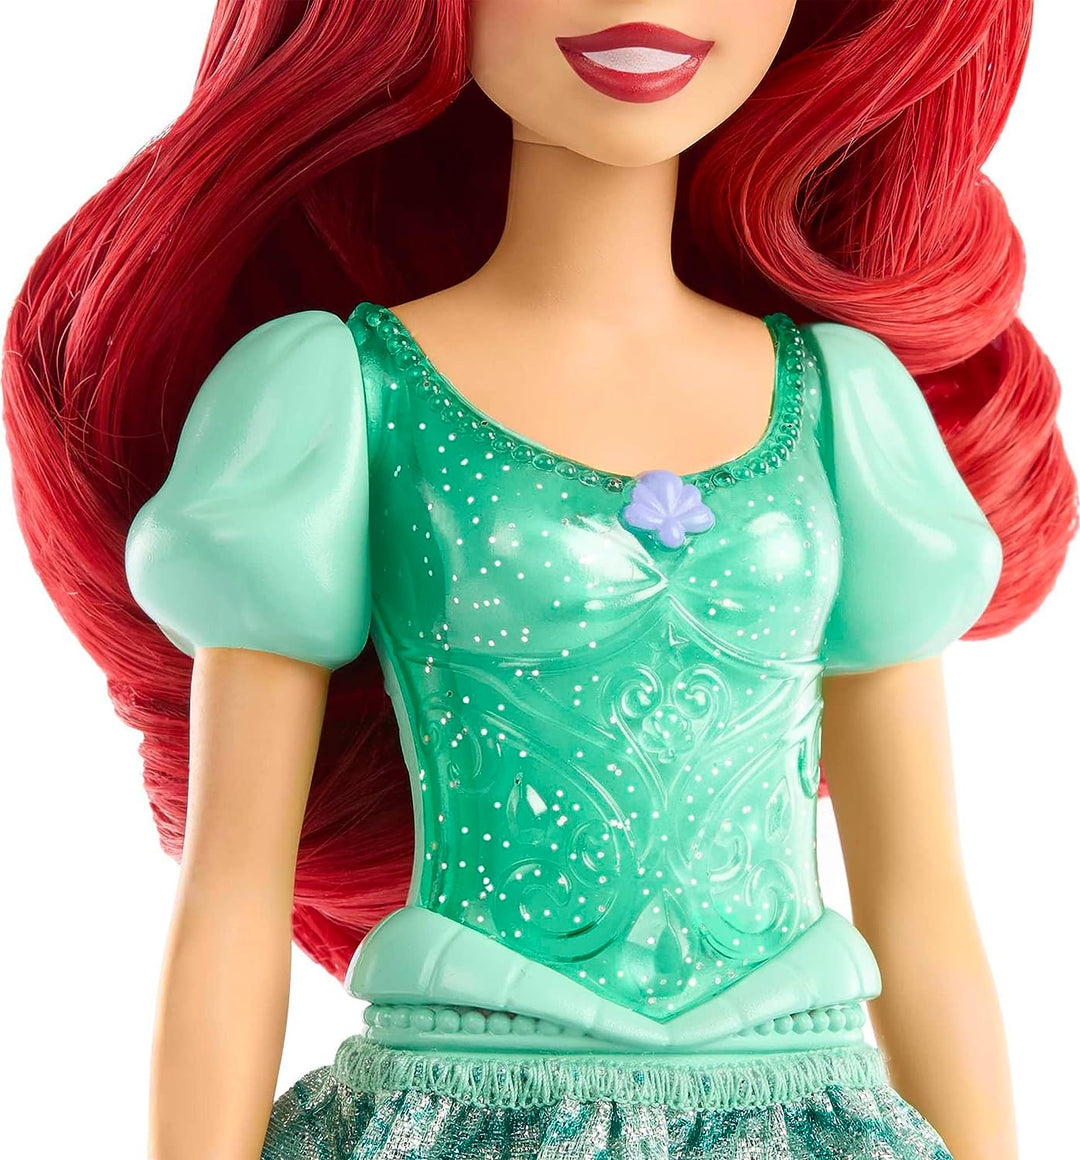 ?Disney Princess Toys, Ariel Posable Fashion Doll with Sparkling Clothing and Accessories